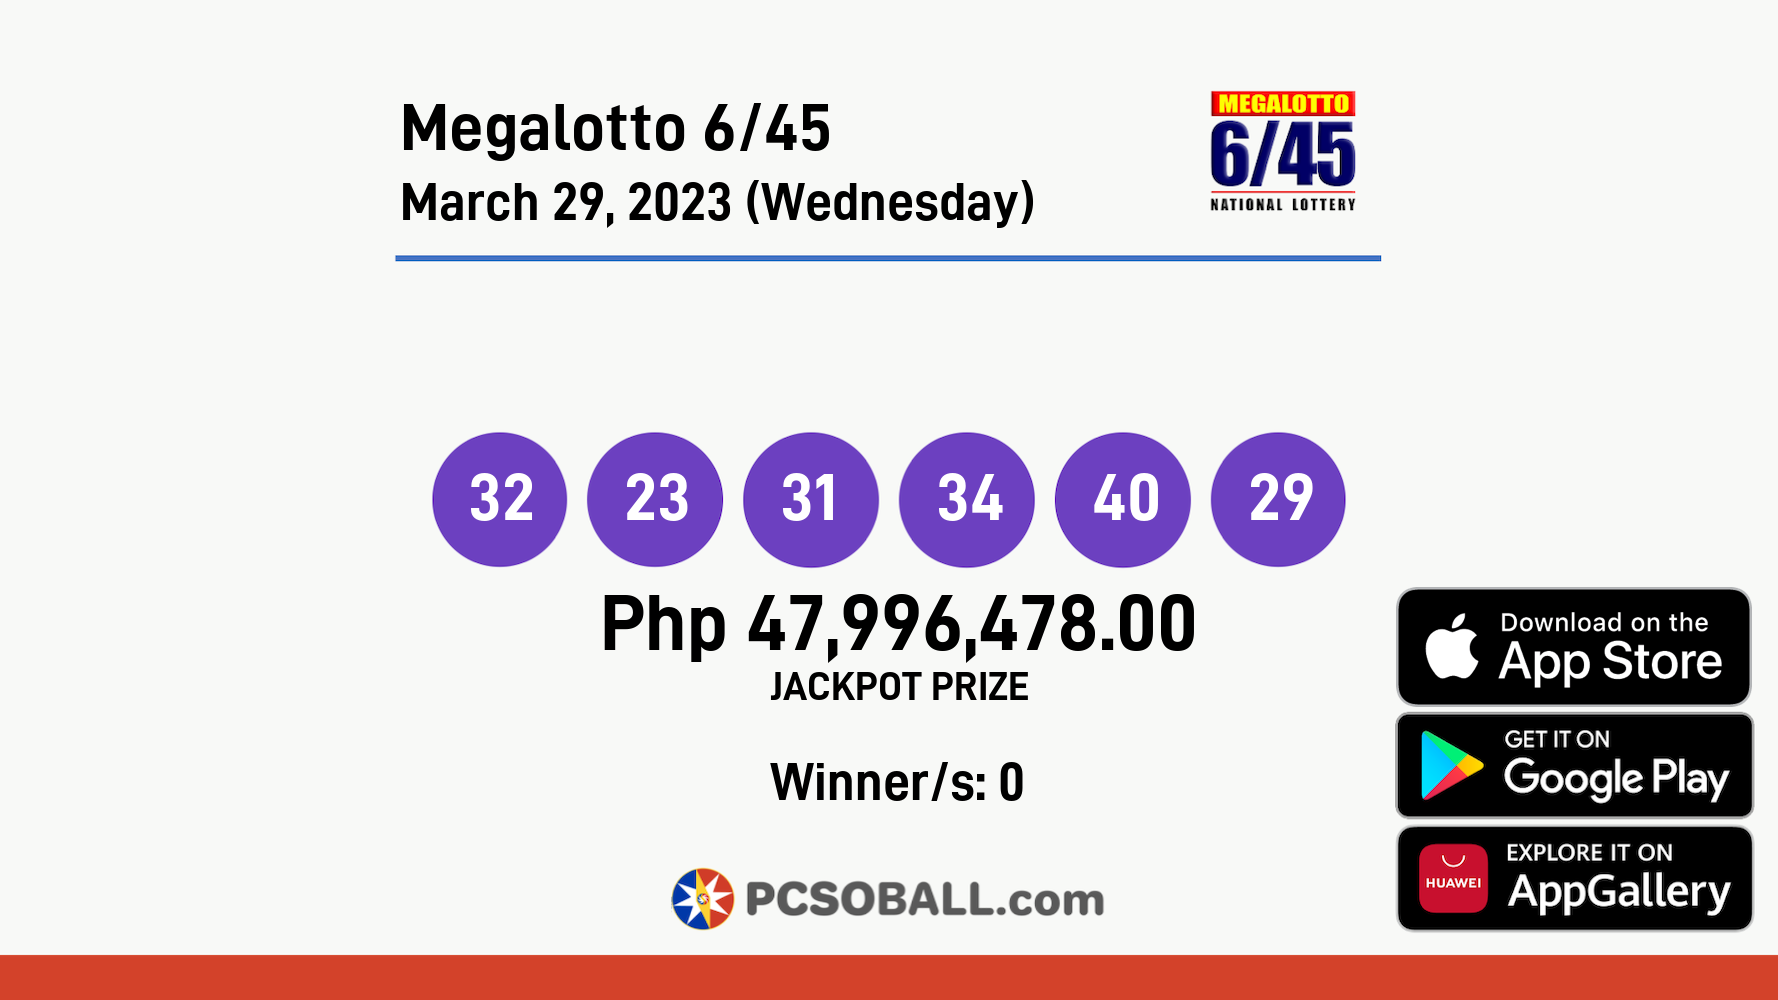 Megalotto 6/45 March 29, 2023 (Wednesday) Result